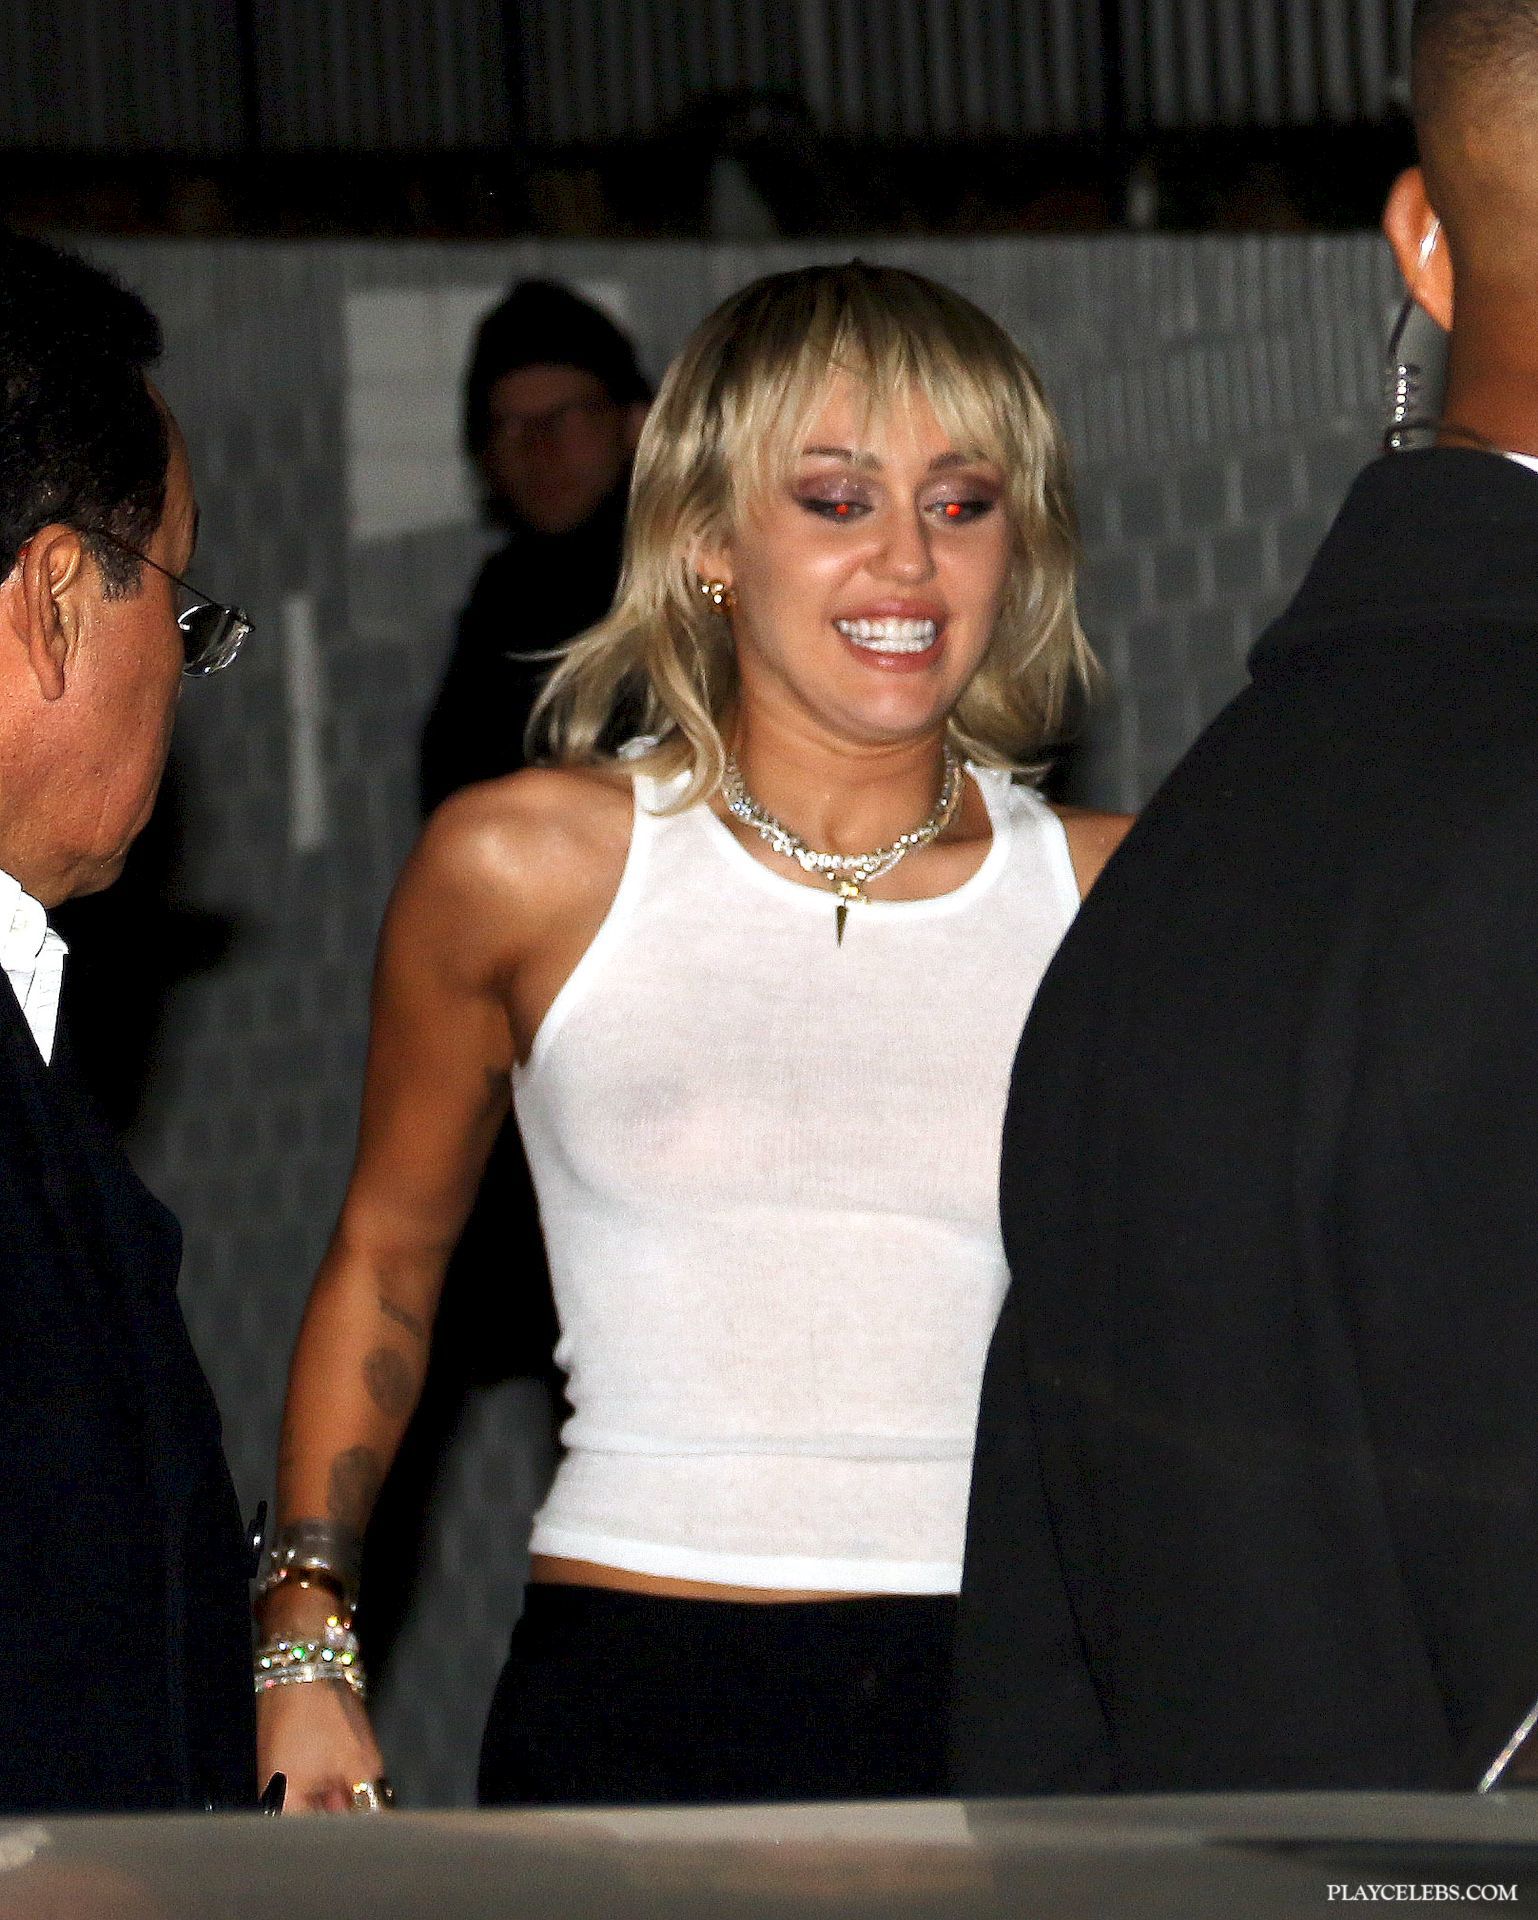 You are currently viewing Miley Cyrus See Through Top On Public